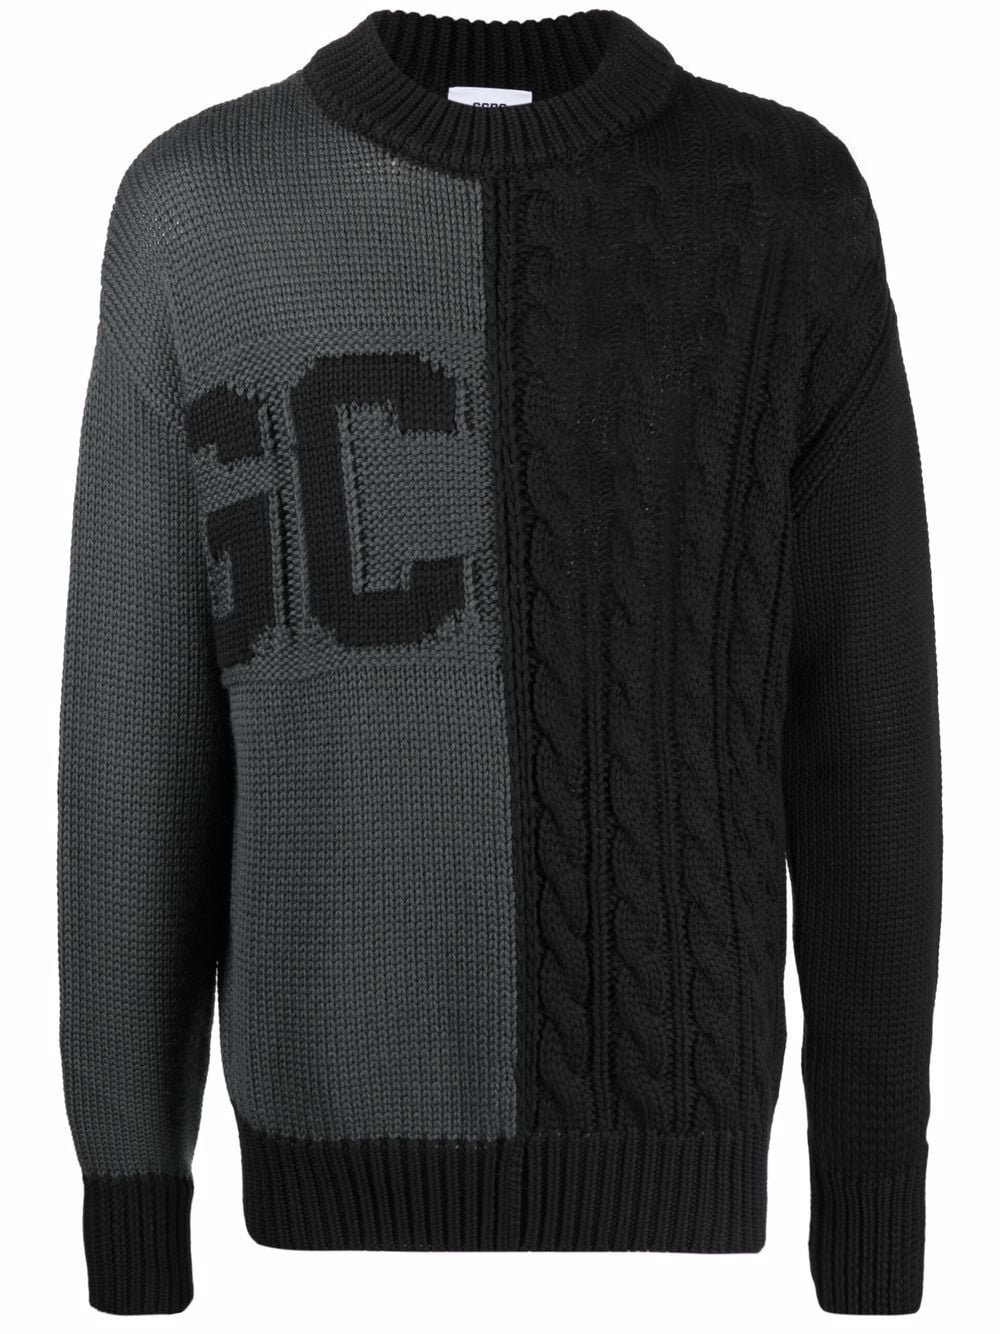 Shop Gcds logo-printed cable-knit jumper with Express Delivery - FARFETCH